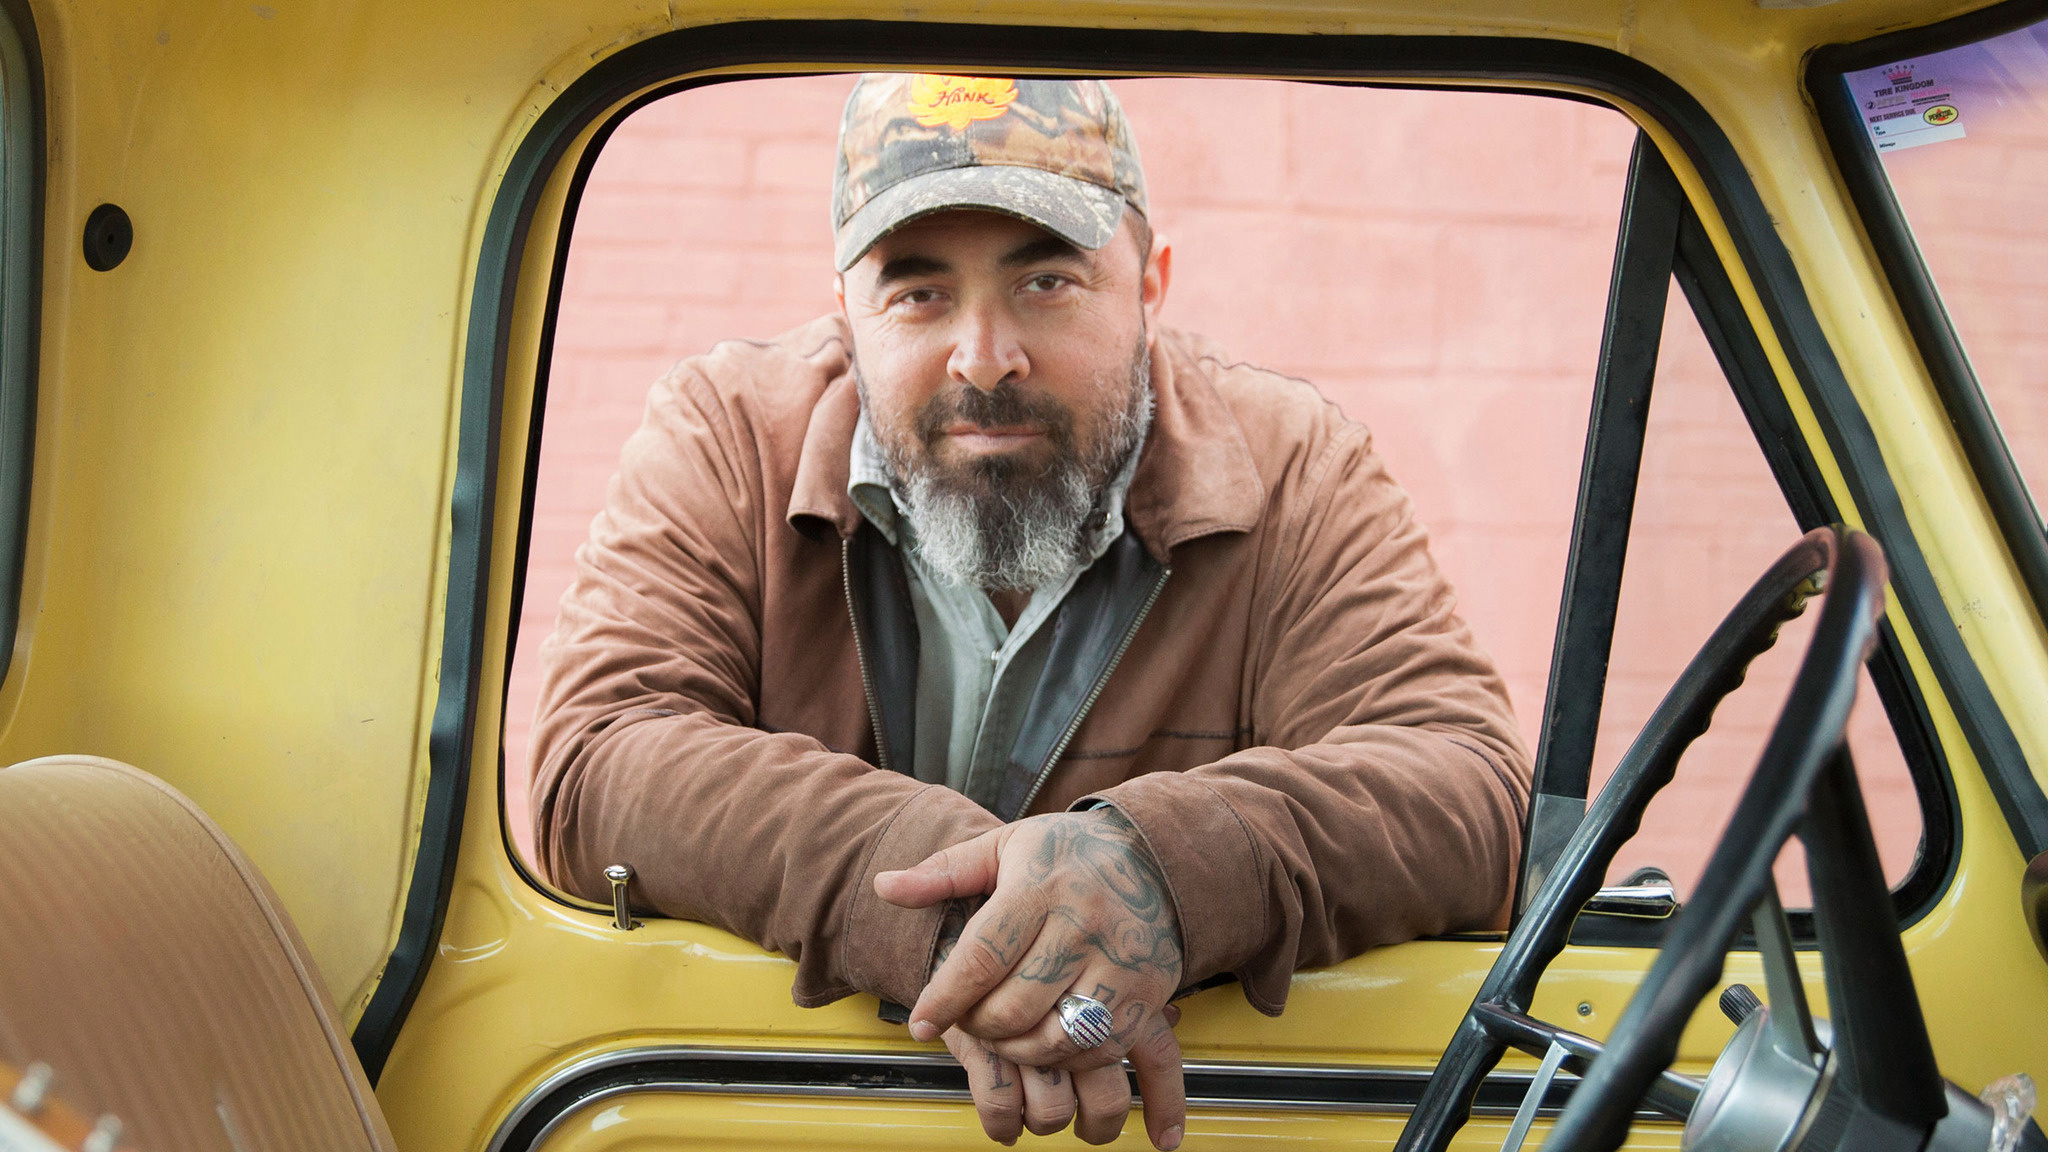 Aaron Lewis HD Wallpapers and Backgrounds 2050x1160